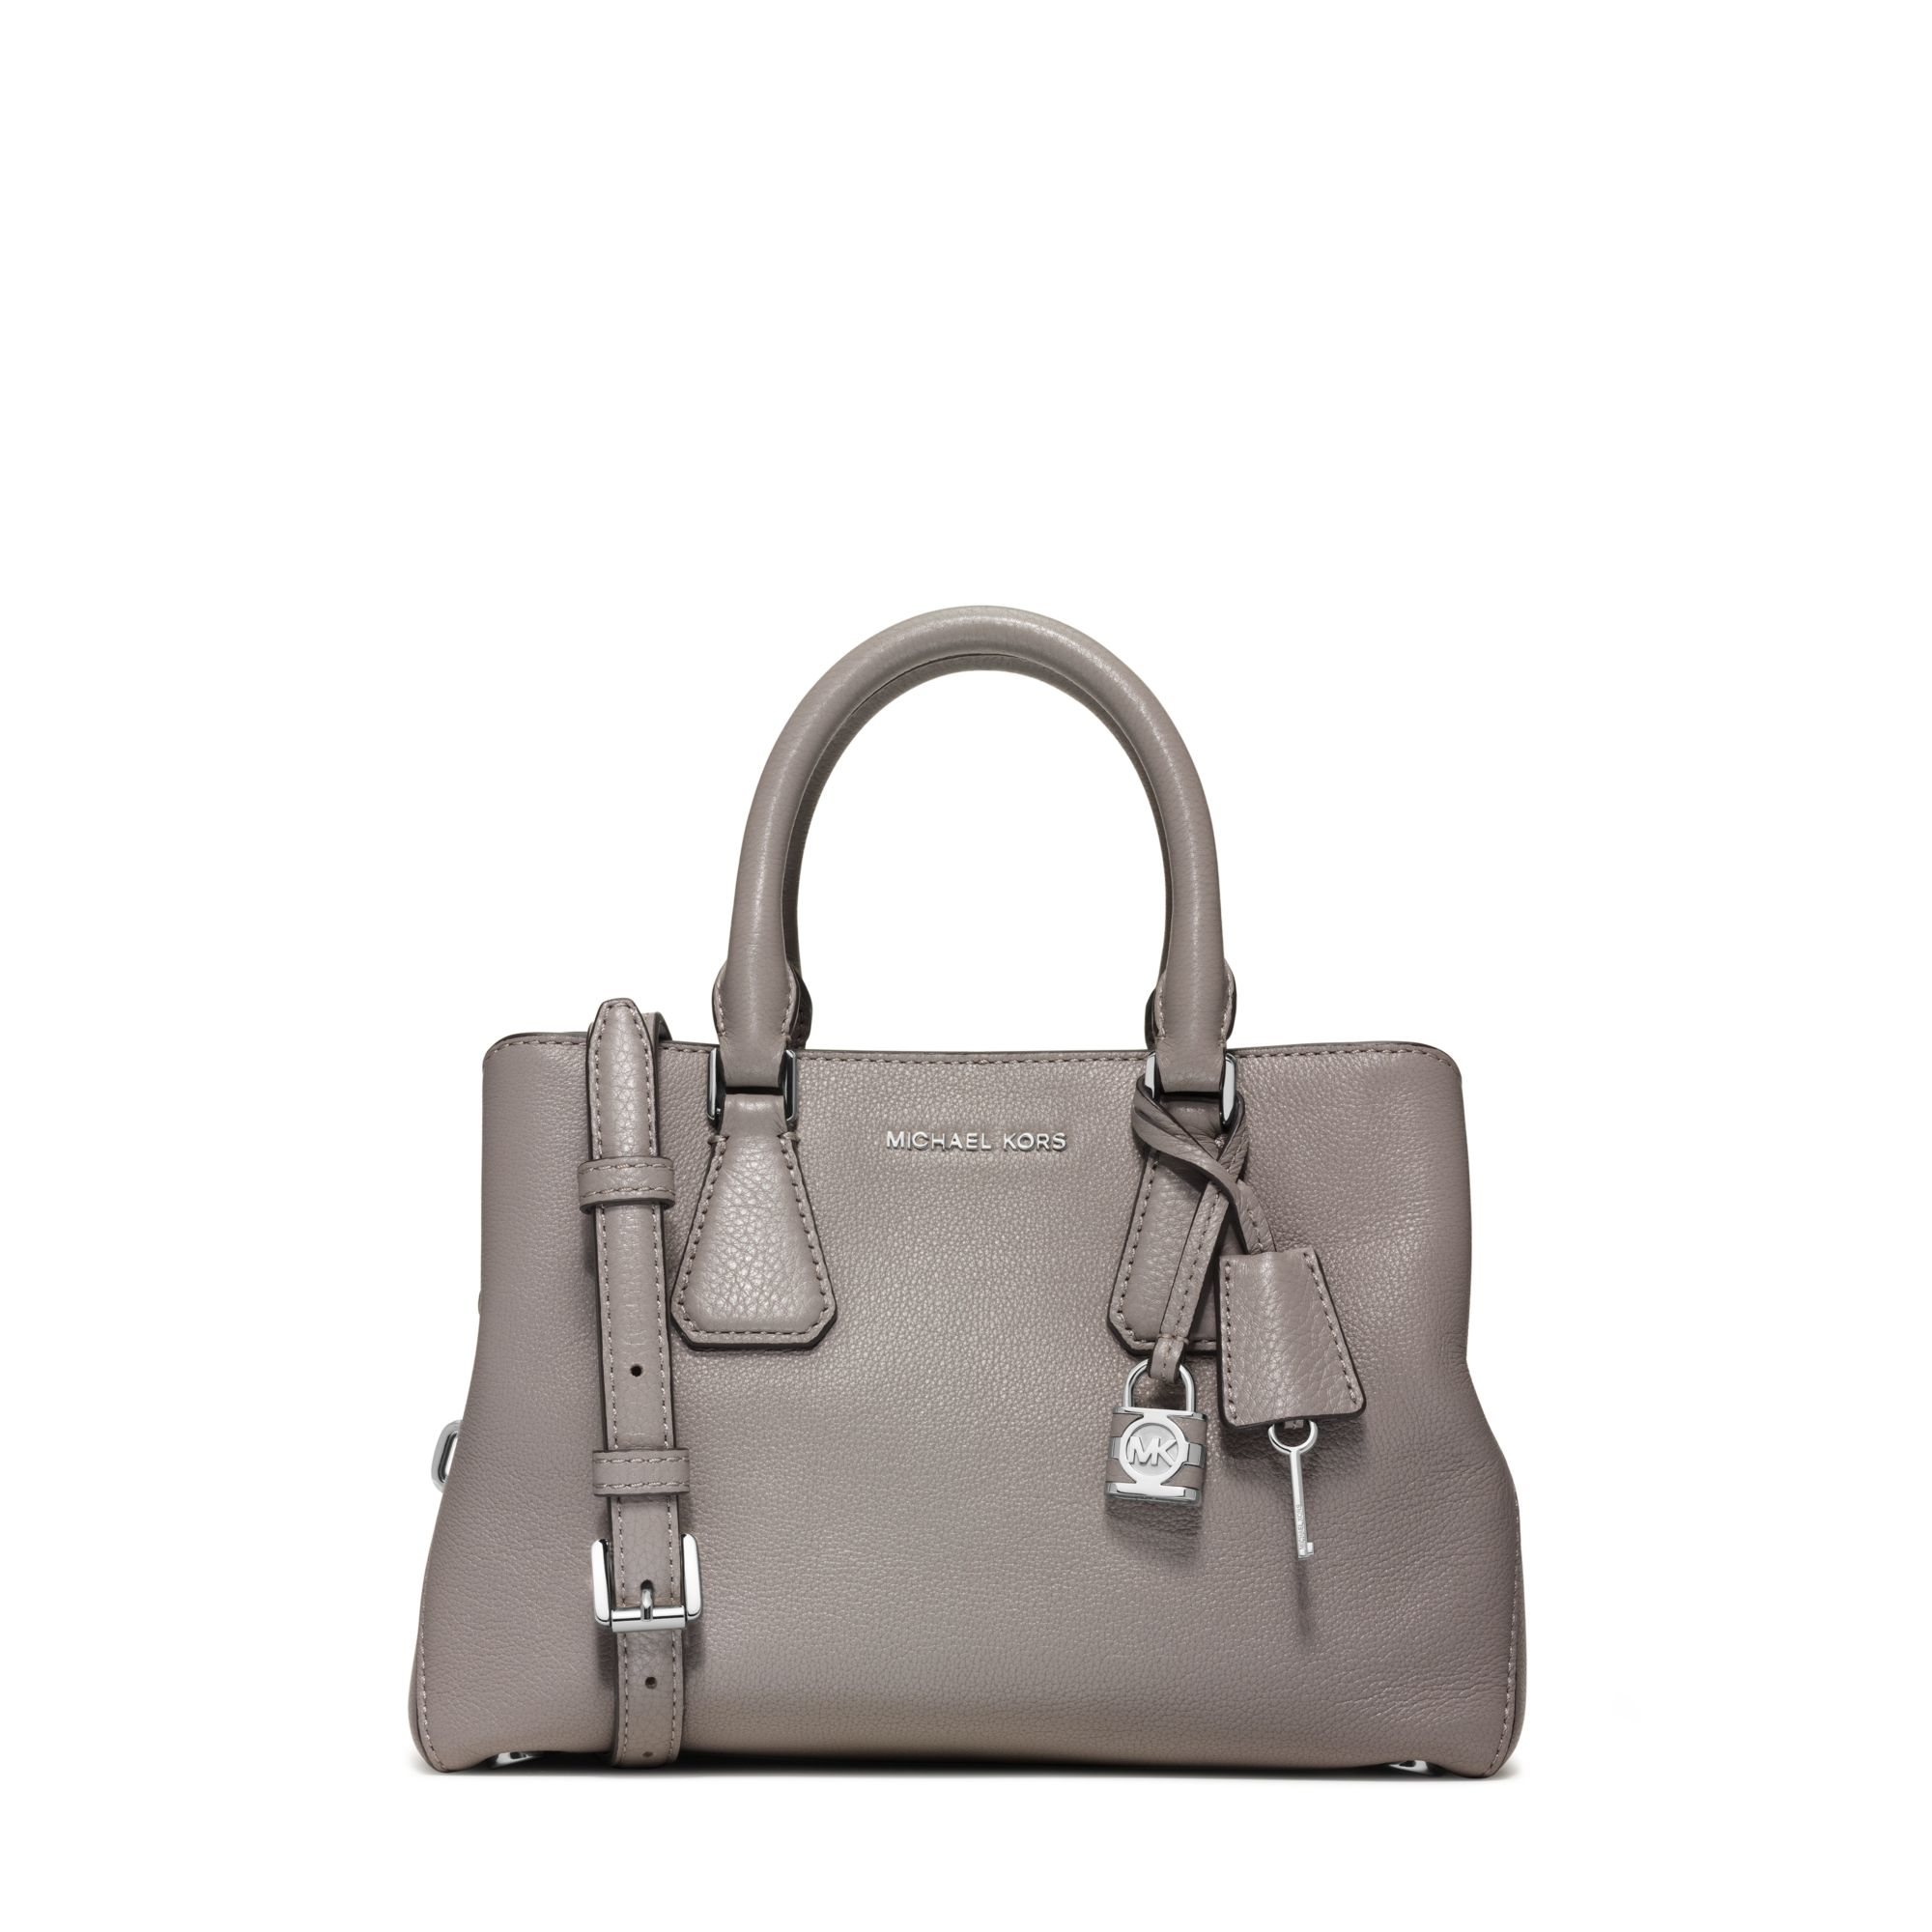 Lyst - Michael Kors Camille Small Leather Satchel in Gray